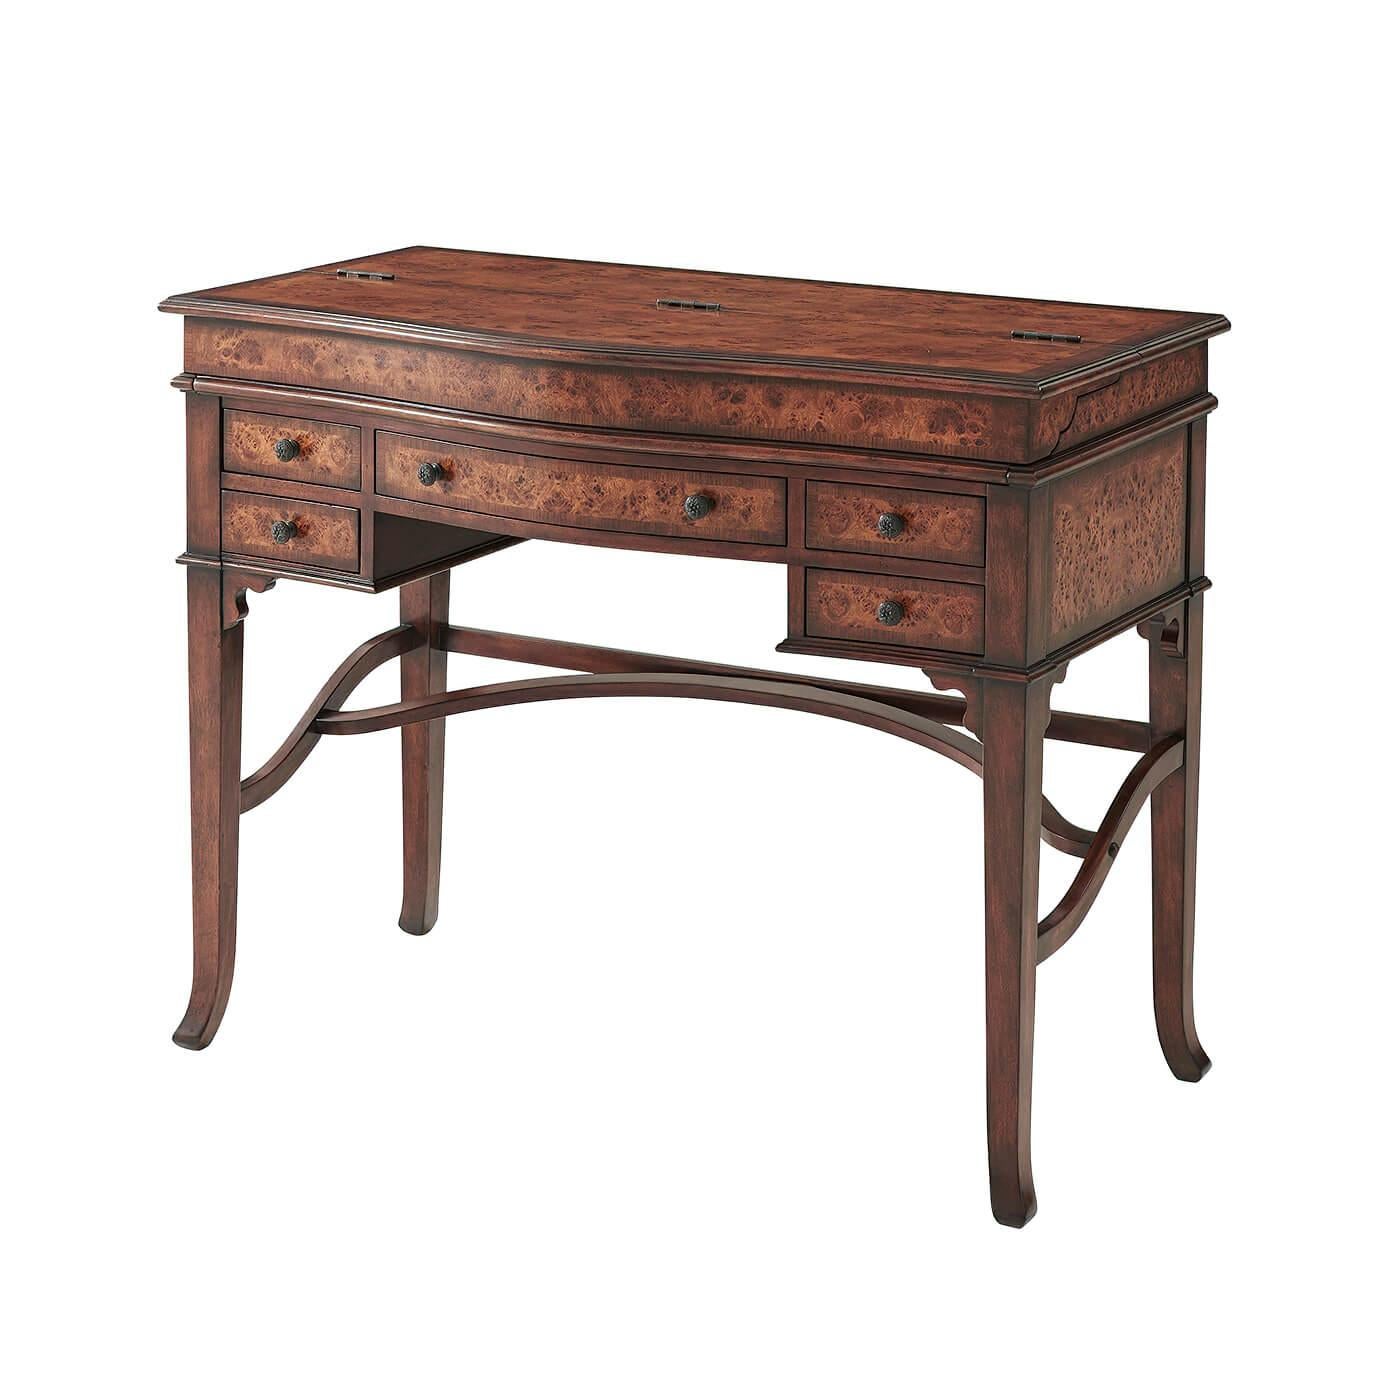 A poplar burl Campaign desk, the flip-top opening to reveal a fitted interior and a leather inset writing surface, five drawers below, tapering legs and stretchers. The original Victorian.

Dimensions: 42